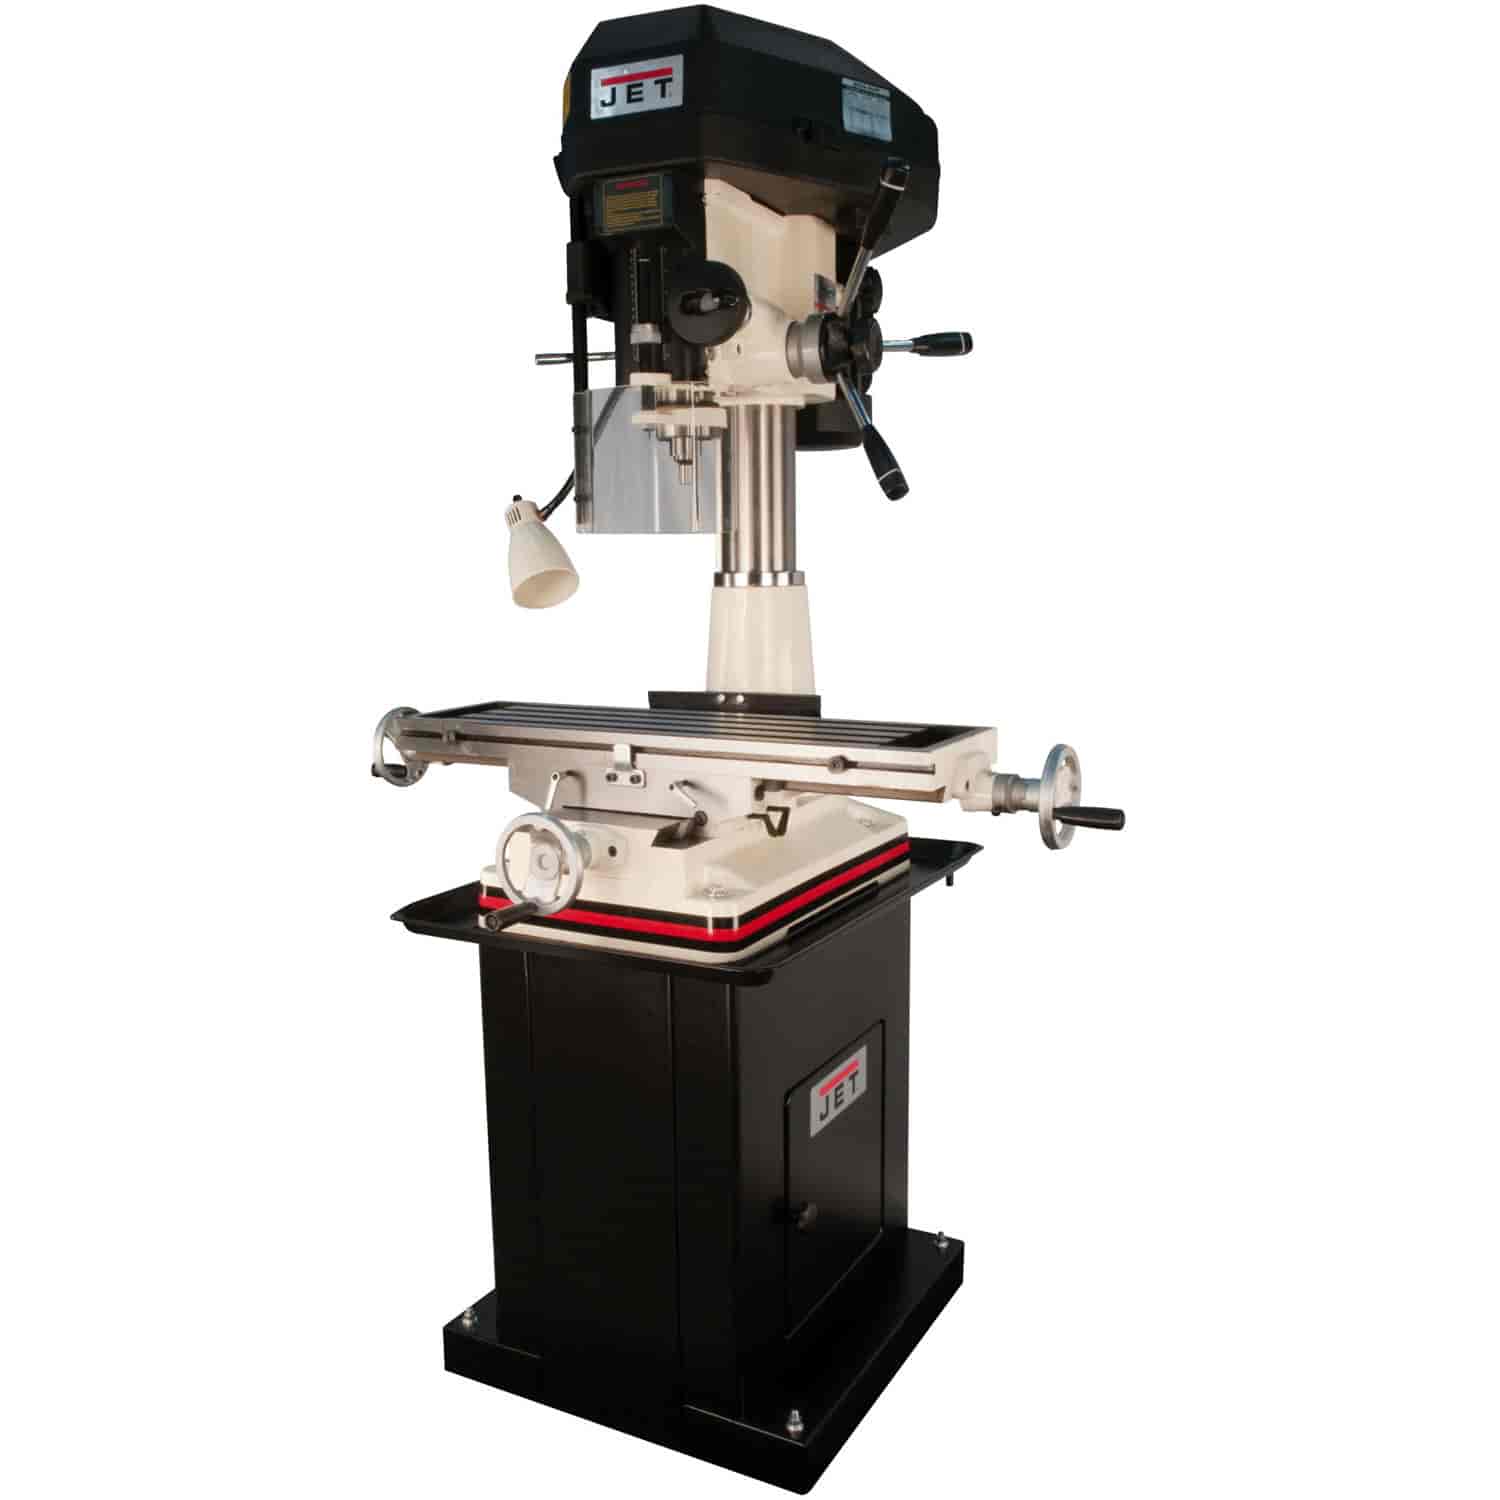 JMD-18PFN Mill/Drill With ACU-RITE VUE DRO and X-Axis Table Powerfeed